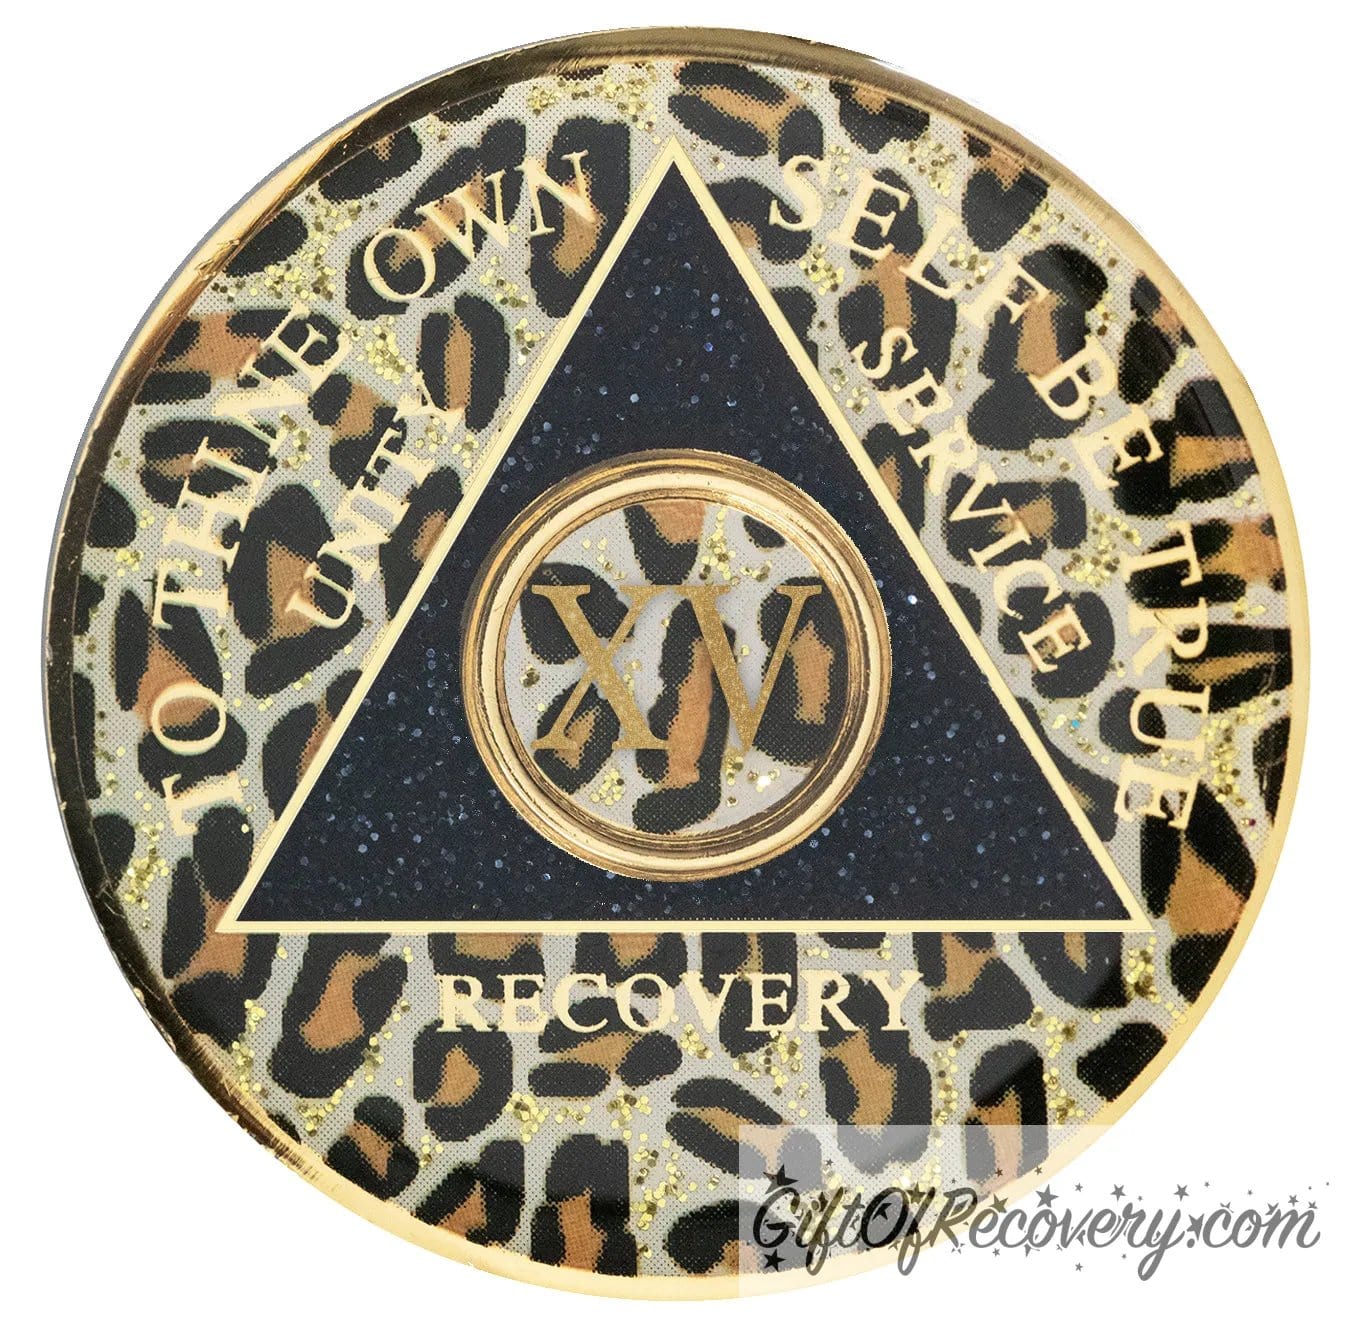 15 year AA medallion leopard print with gold flaked spots, to thine own self be true, unity, service, recovery, and roman numeral are gold foil so you can let your recovery shine, not your time, the circle triangle is embossed with 14k gold-plated brass, the recovery medallion is sealed with resin for a shiny finish.